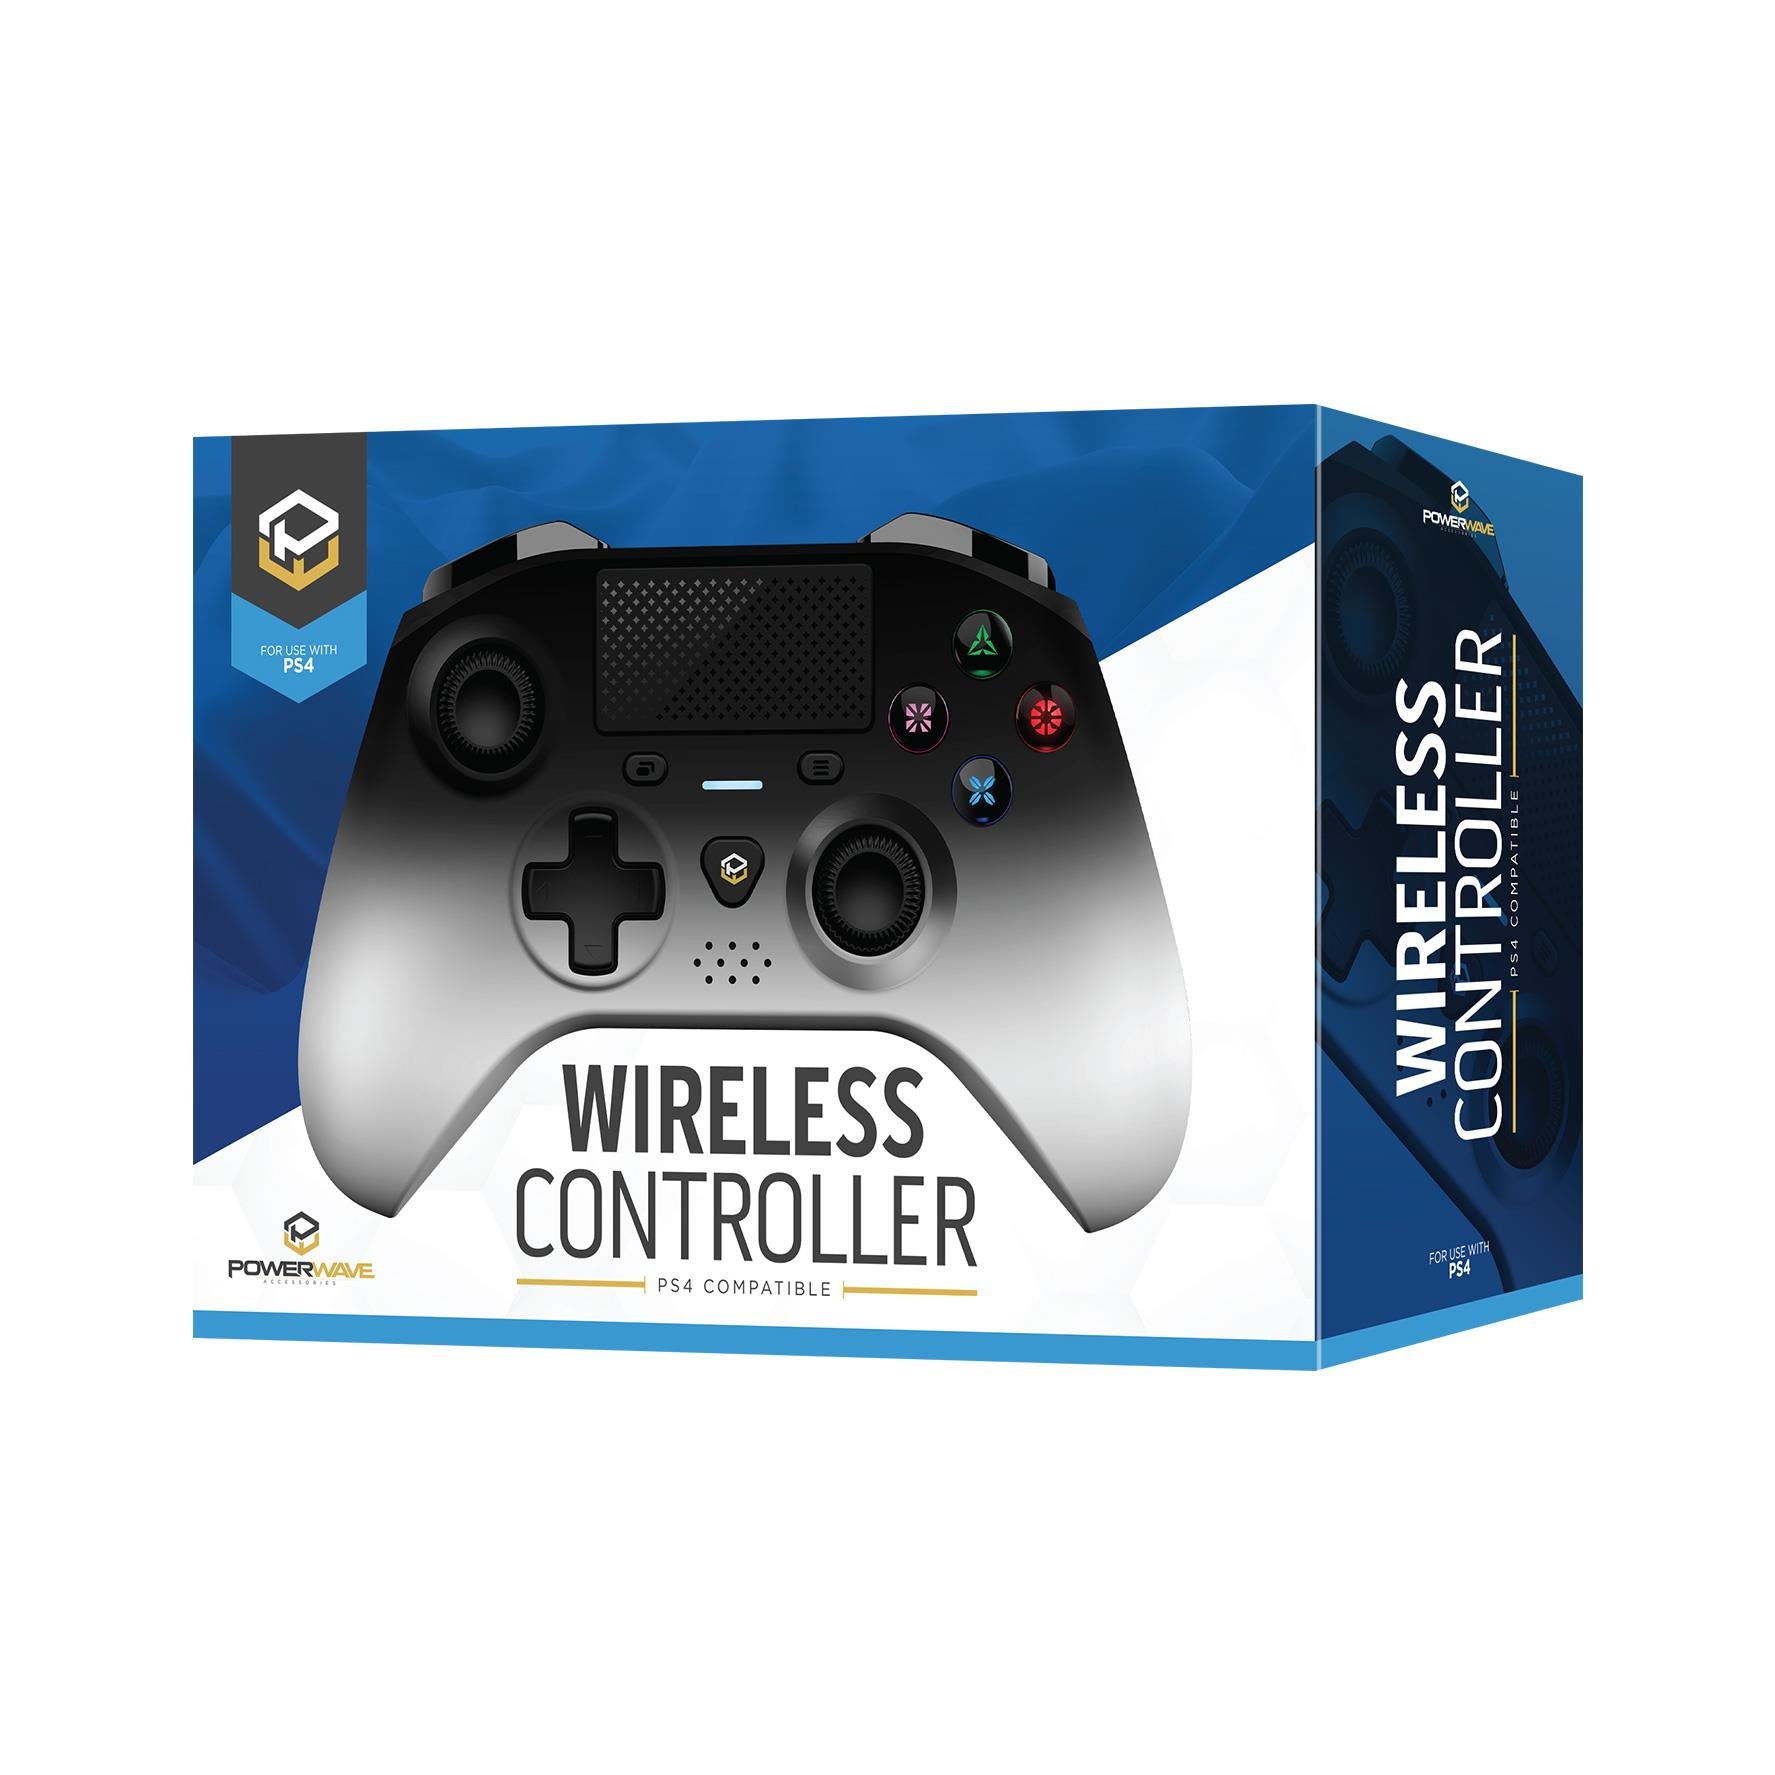 powerwave wireless controller for playstation 4 (ghost)